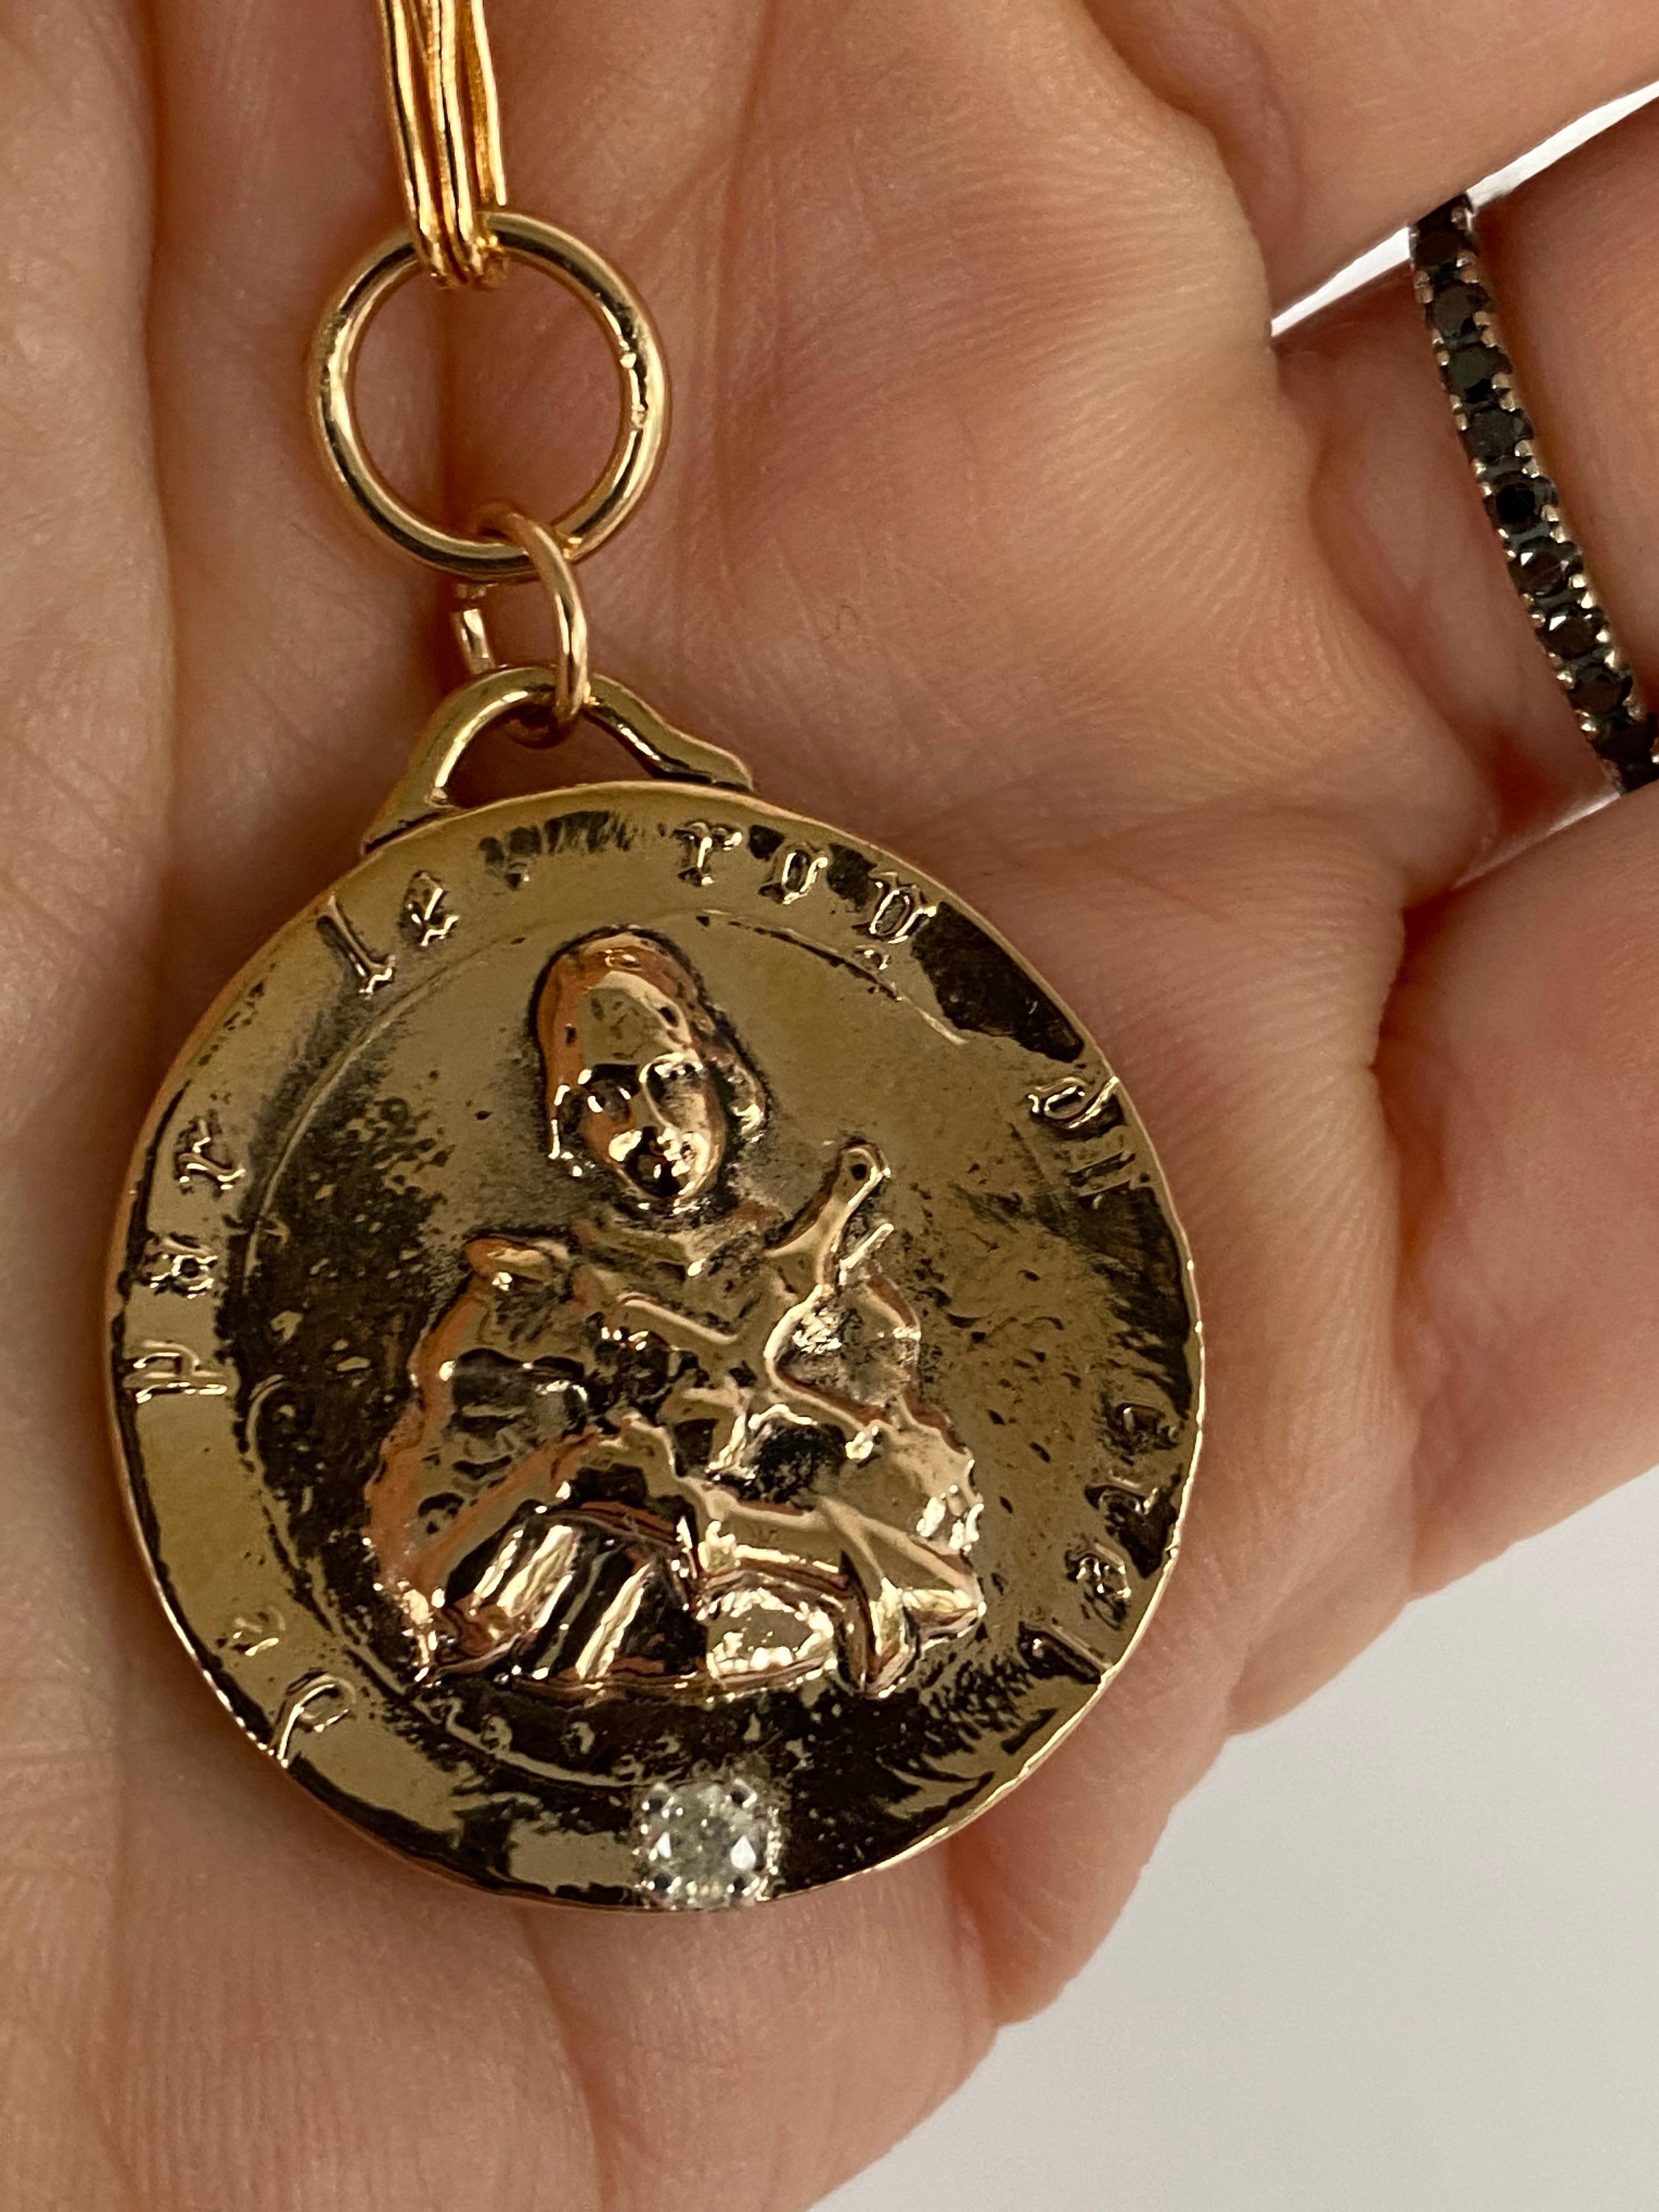 White Diamond Joan of Arc Medal Round Coin Pendant Chain Necklace by J Dauphin

Exclusive piece with Joan of Arc Medal Round Coin pendant in Bronze with a White Diamond and a gold filled Chain. Necklace is 24